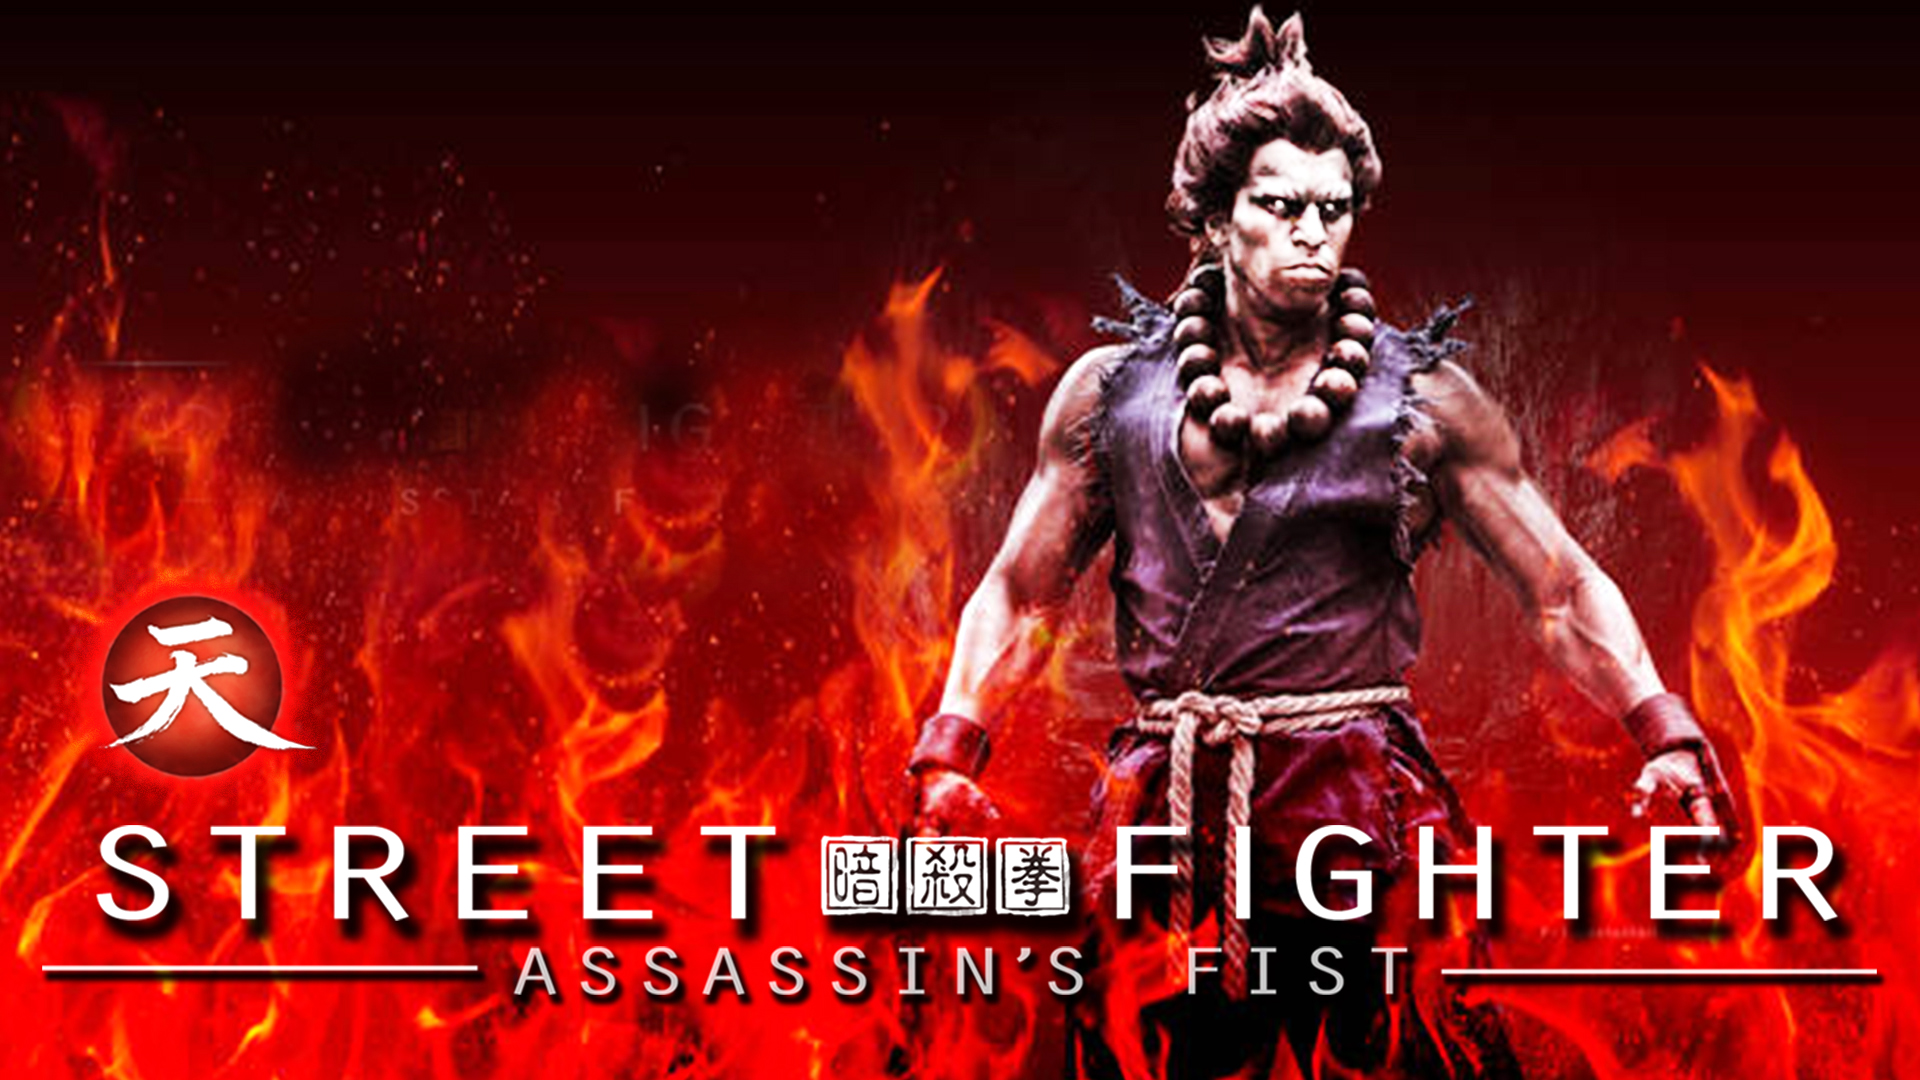 STREET FIGHTER: ASSASSIN'S FIST (Based on Widely Played Video Game Franchise)